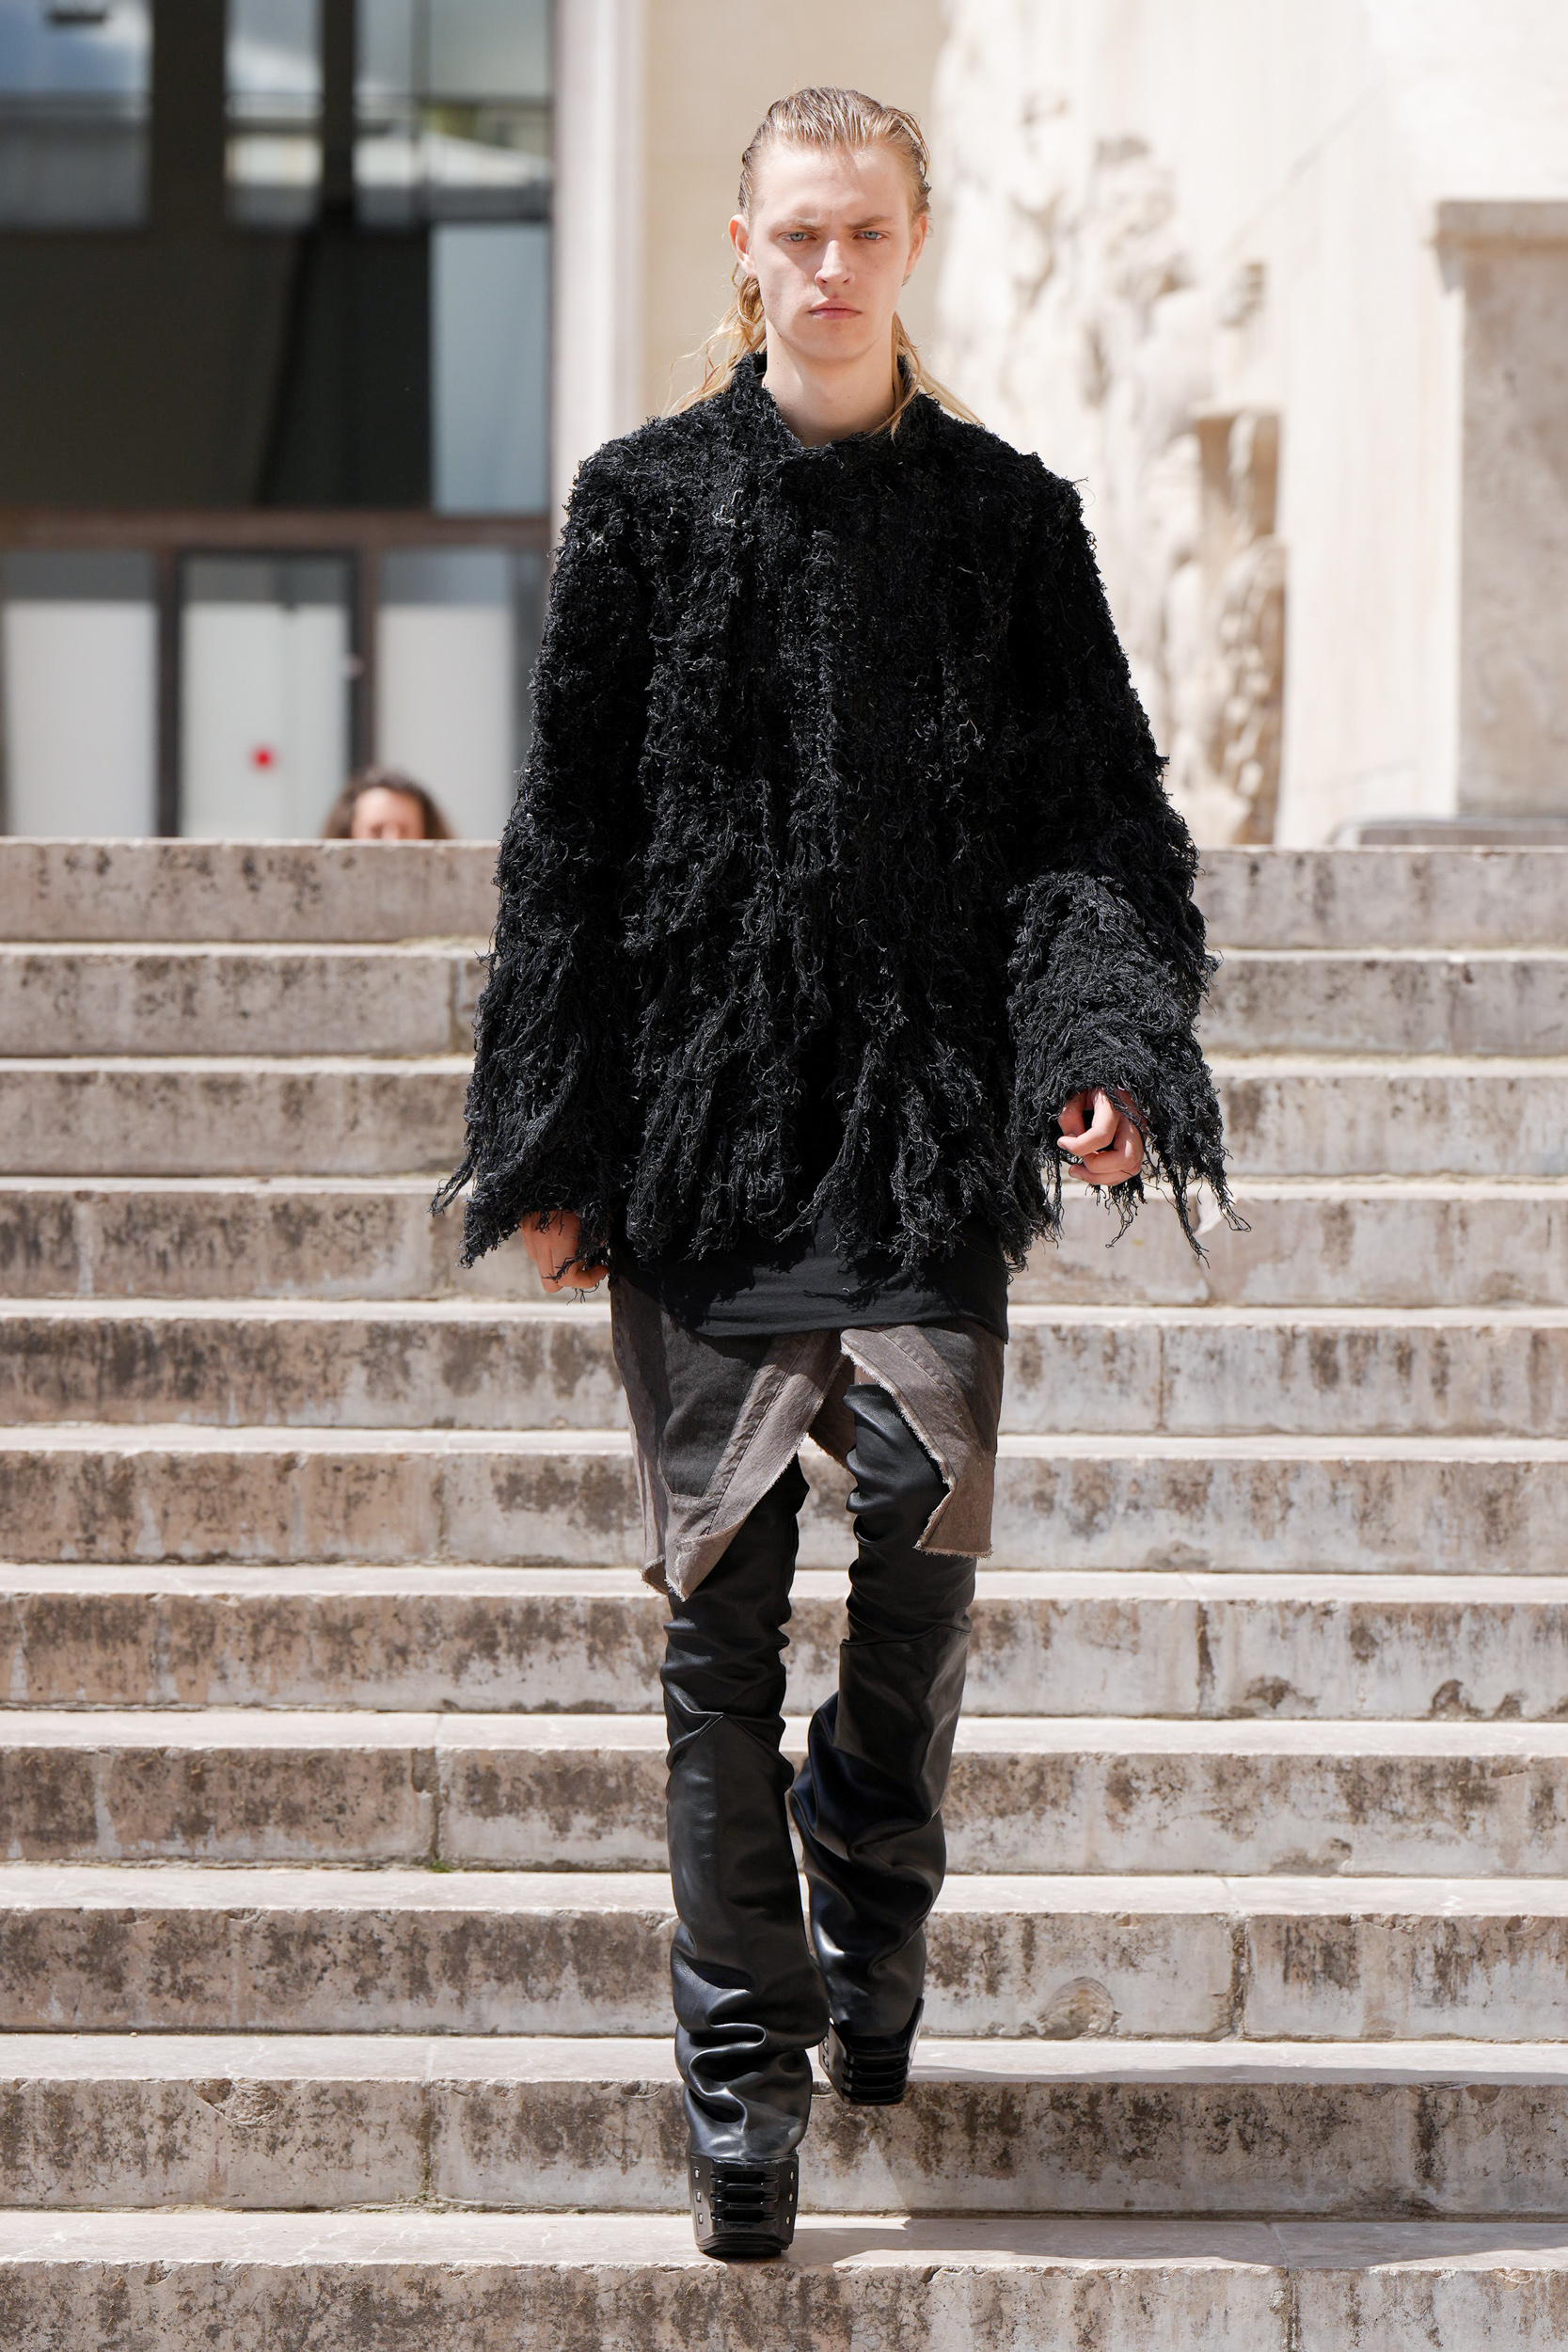 Rick Owens Added Balls of Flame to His Spring 2023 Men's Fashion Show